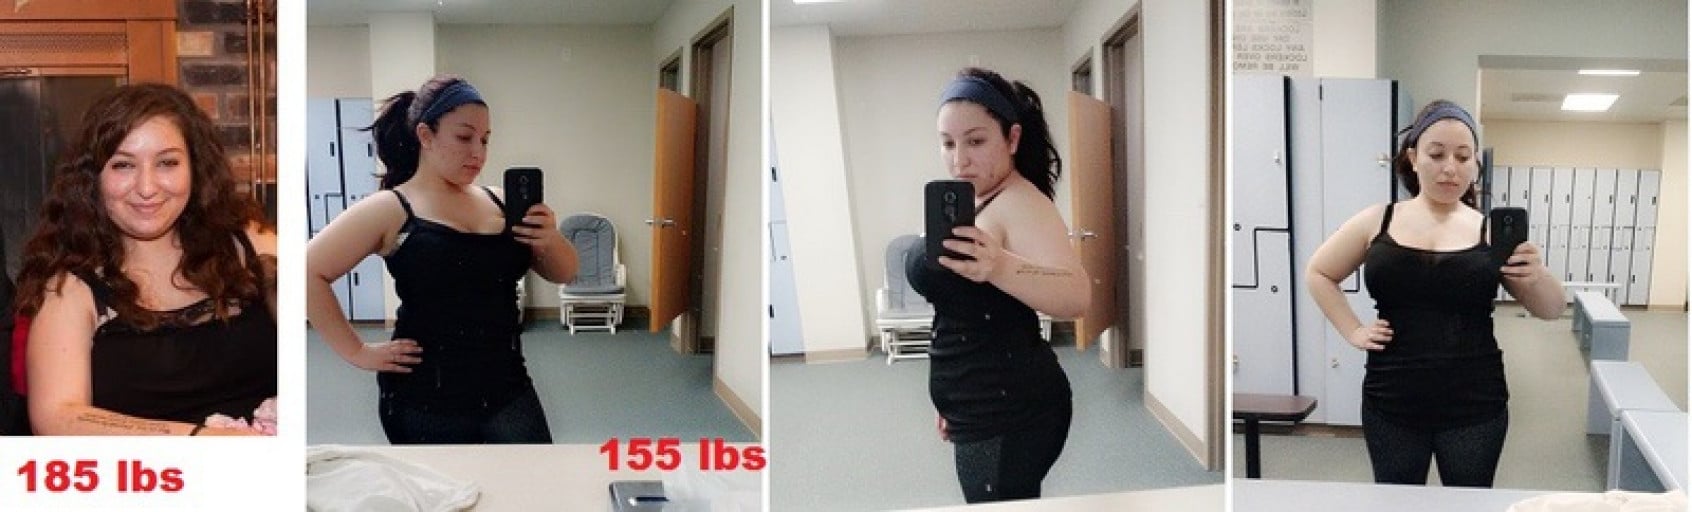 A before and after photo of a 4'10" female showing a weight cut from 187 pounds to 155 pounds. A respectable loss of 32 pounds.